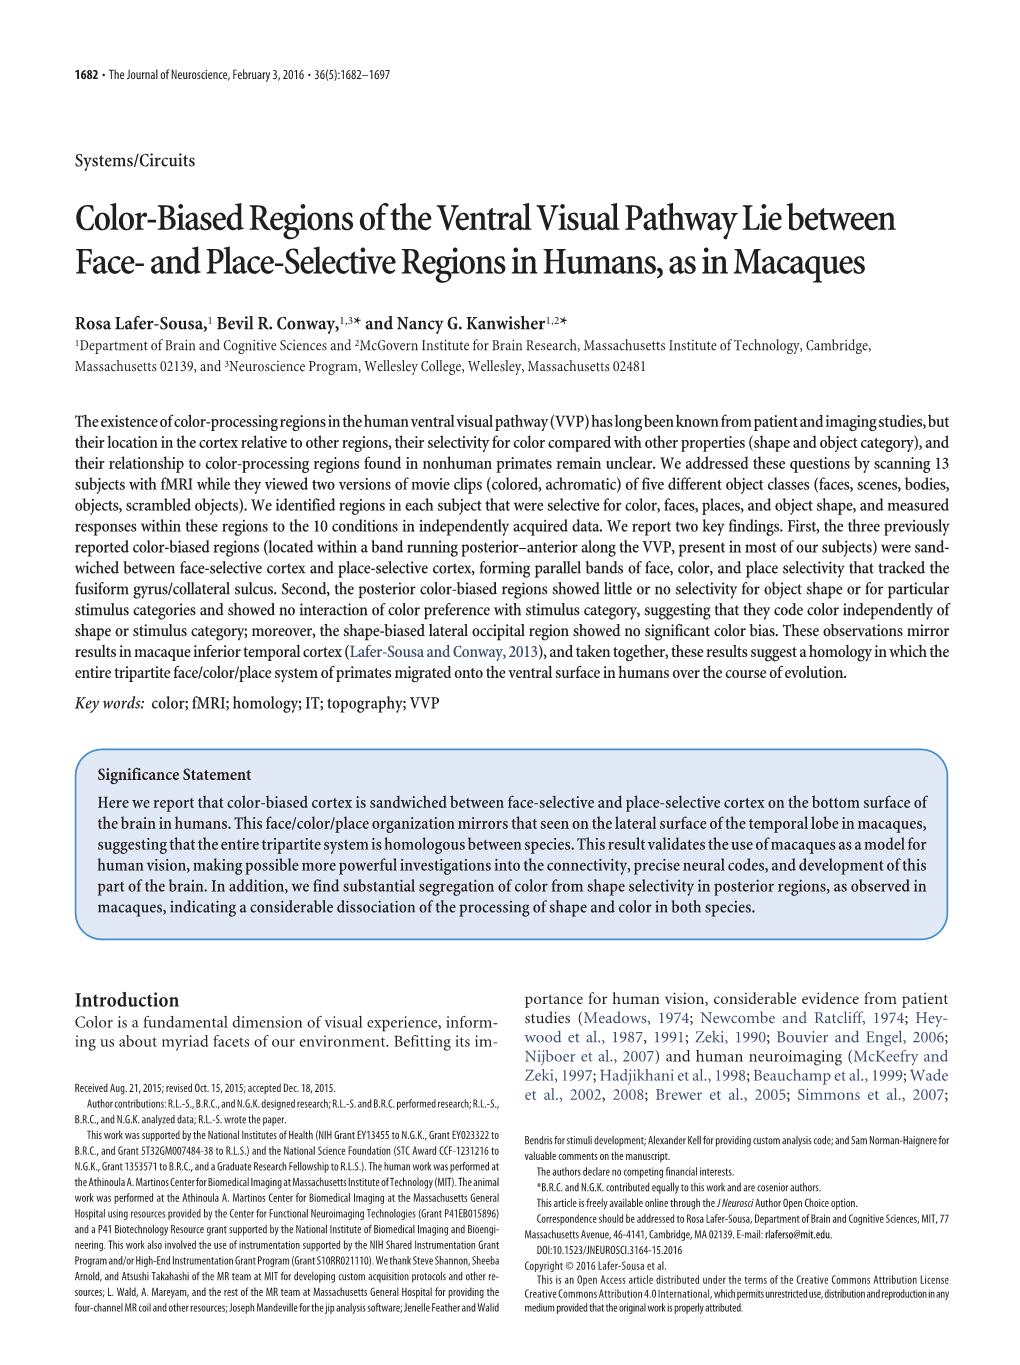 Color-Biased Regions of the Ventral Visual Pathway Lie Between Face